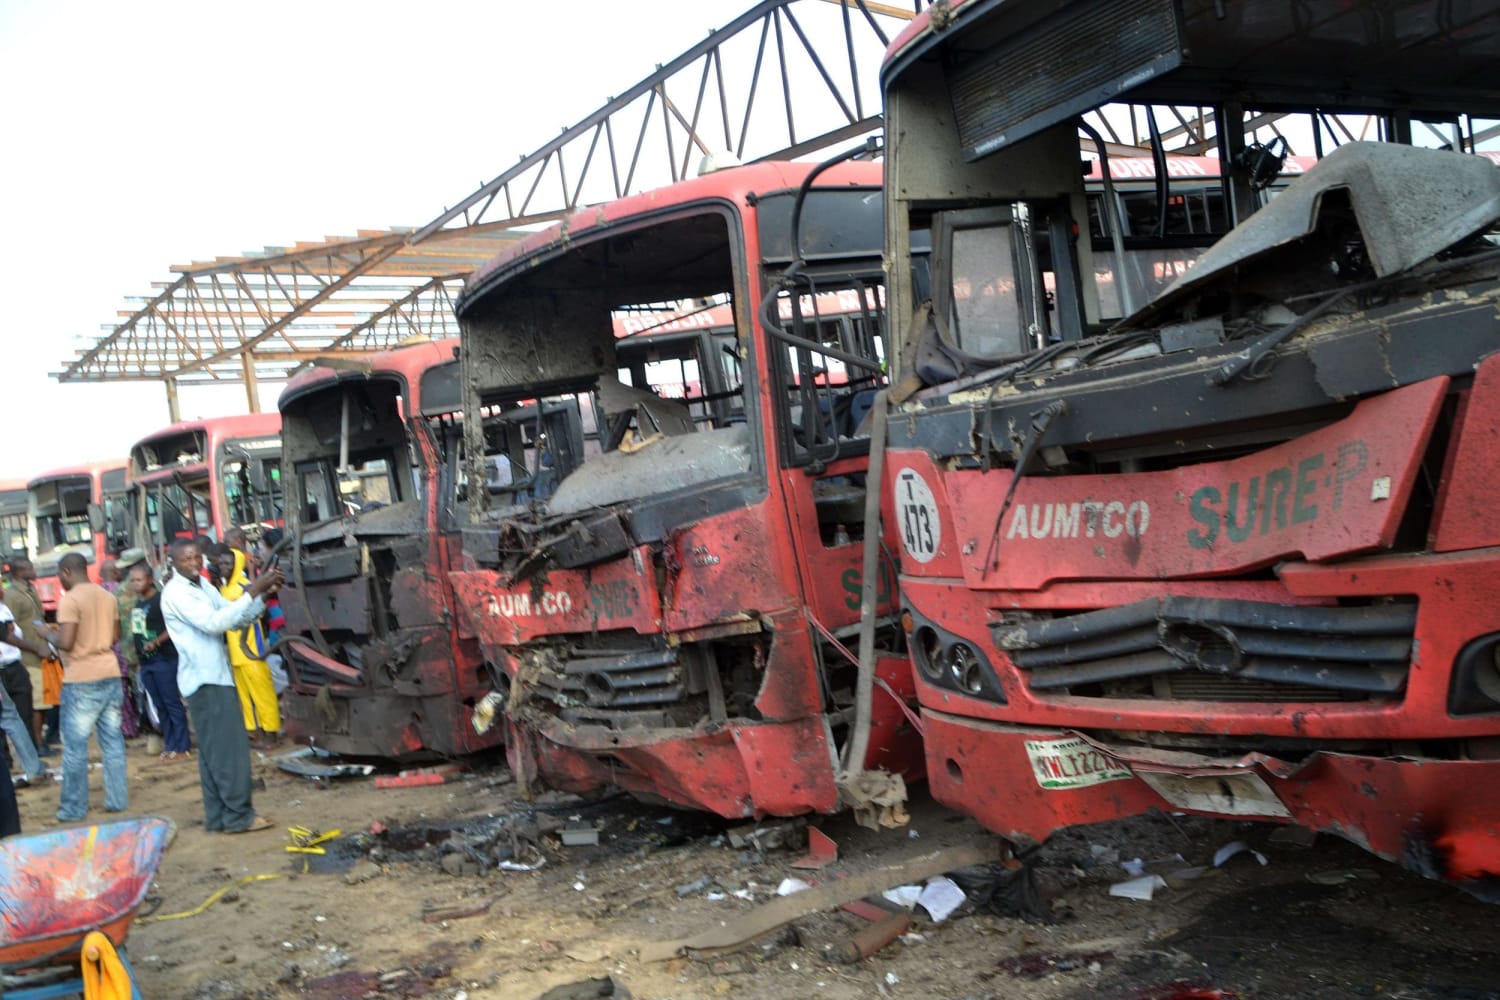 Image: Buses burnt after bombing in Abuja, Nigeria